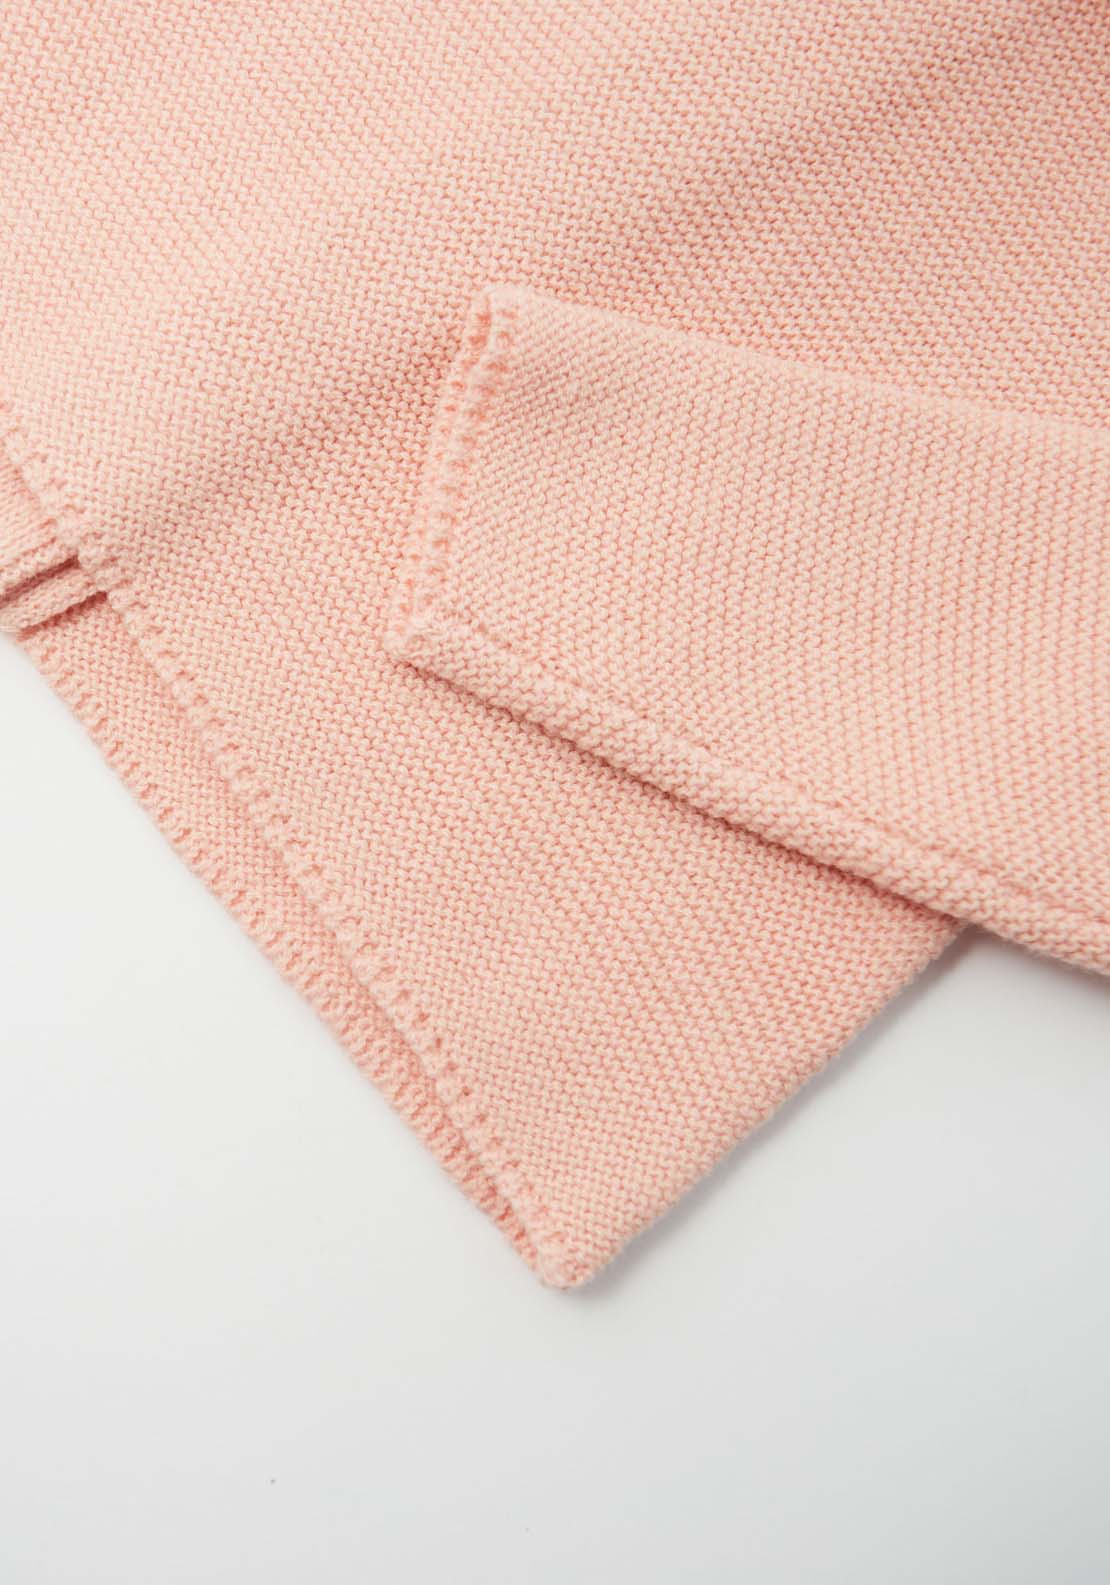 Sfera Ruffle Neck Knit Top - Pink 4 Shaws Department Stores